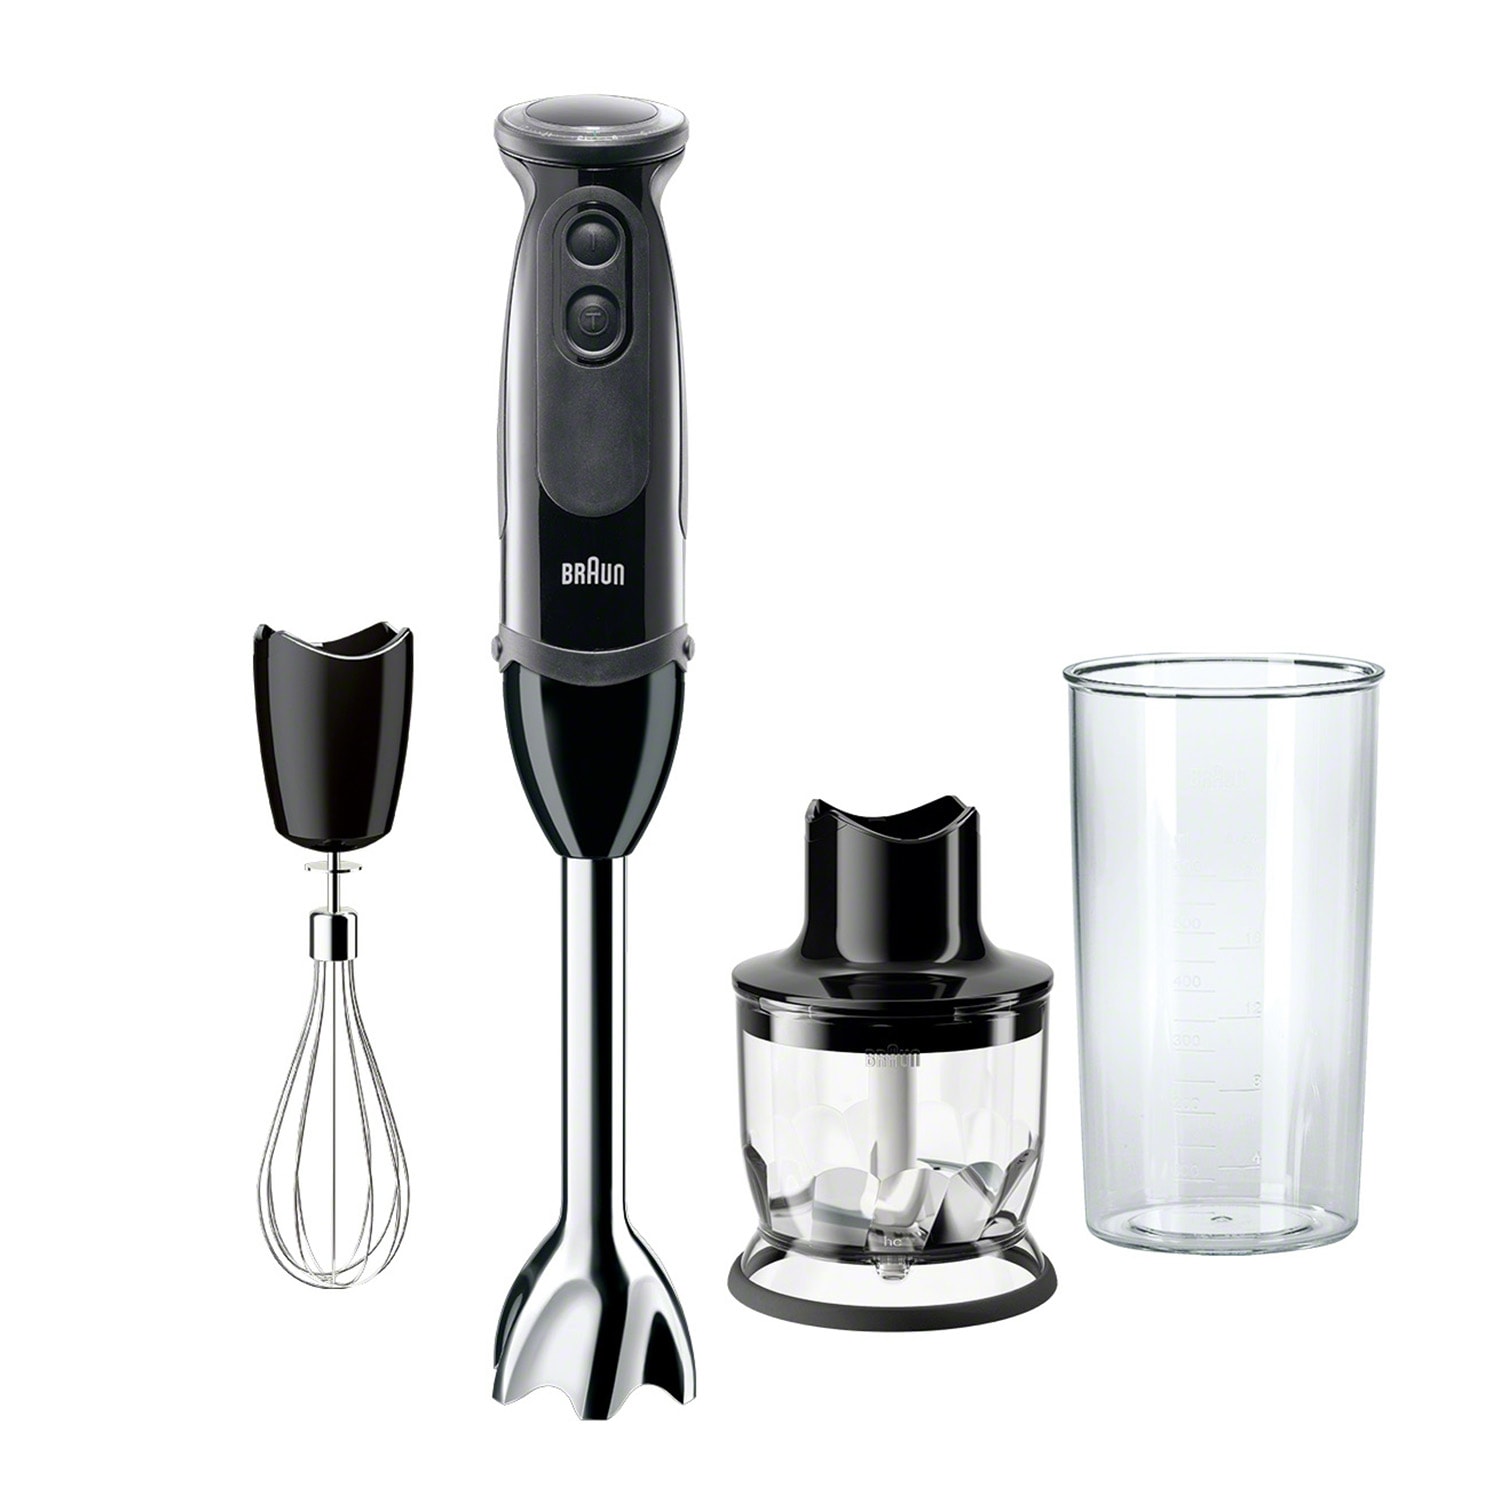 Cuisinart Immersion Hand Blender with Storage Case (Factory Refurbished)